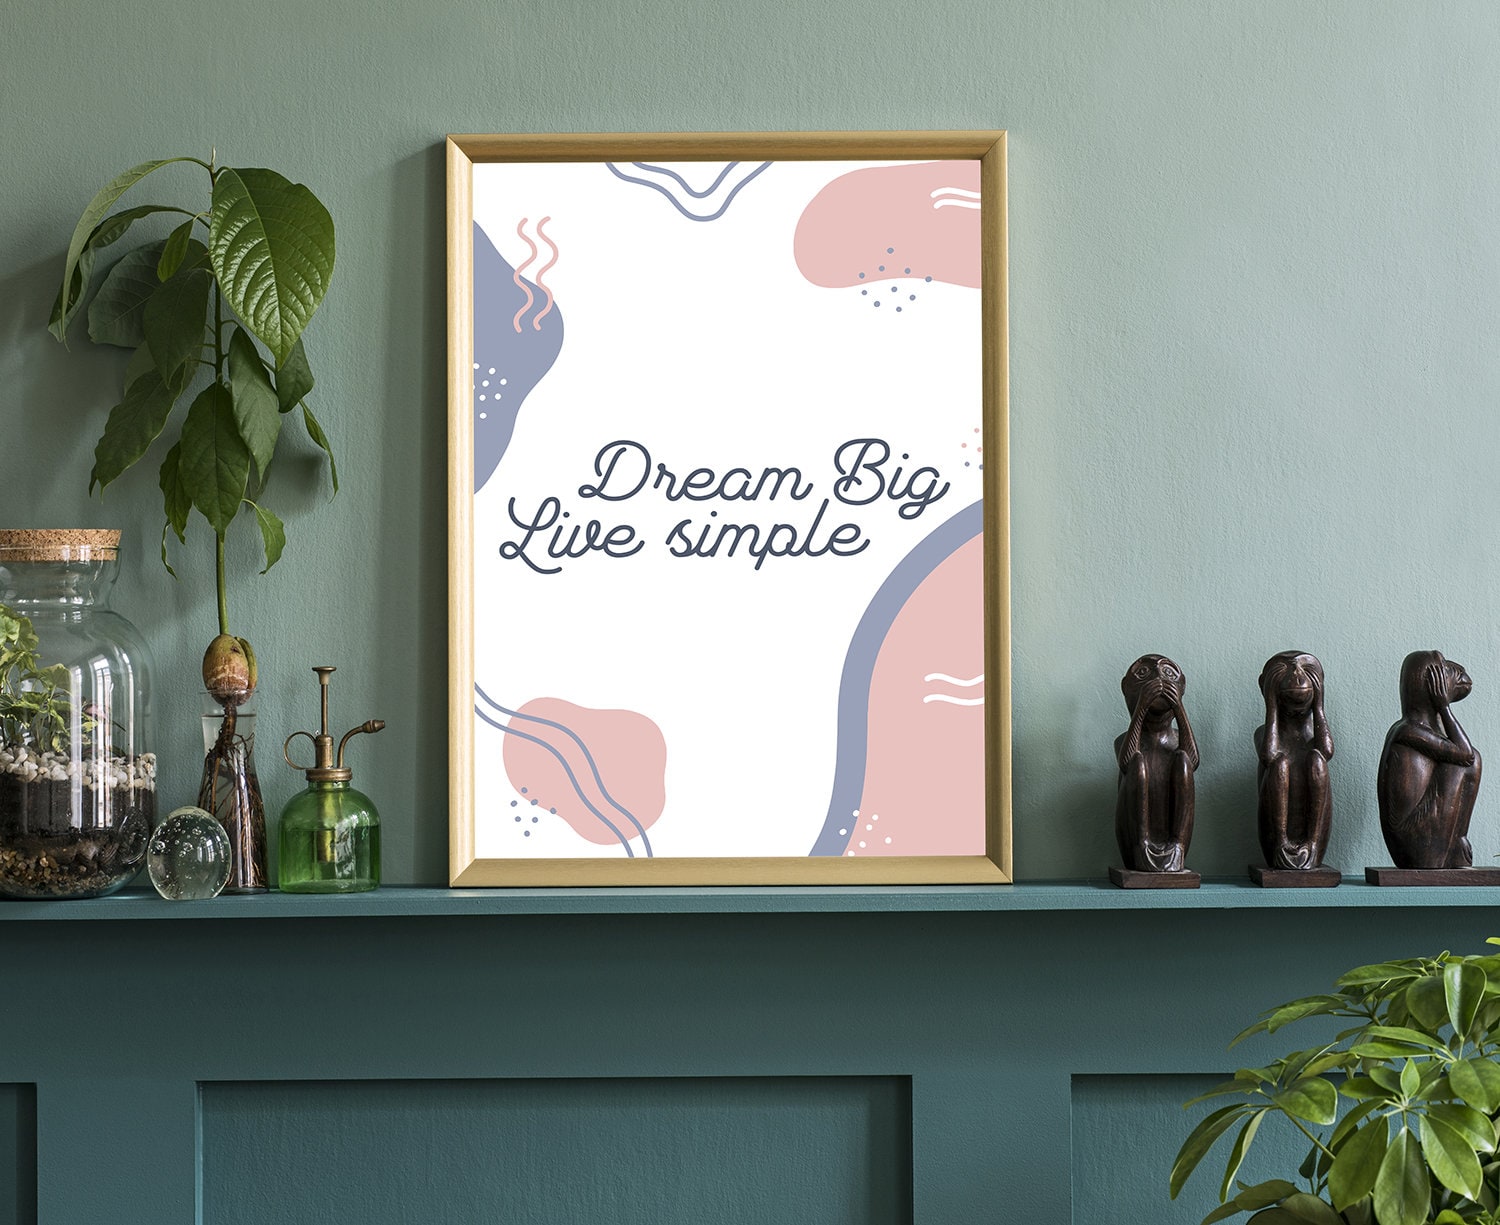 Dream Big Live Simple, Poster Prints, Modern Poster prints, Home wall Art Prints, Dorm Rooms wall art, Office wall decor, Motivational quote